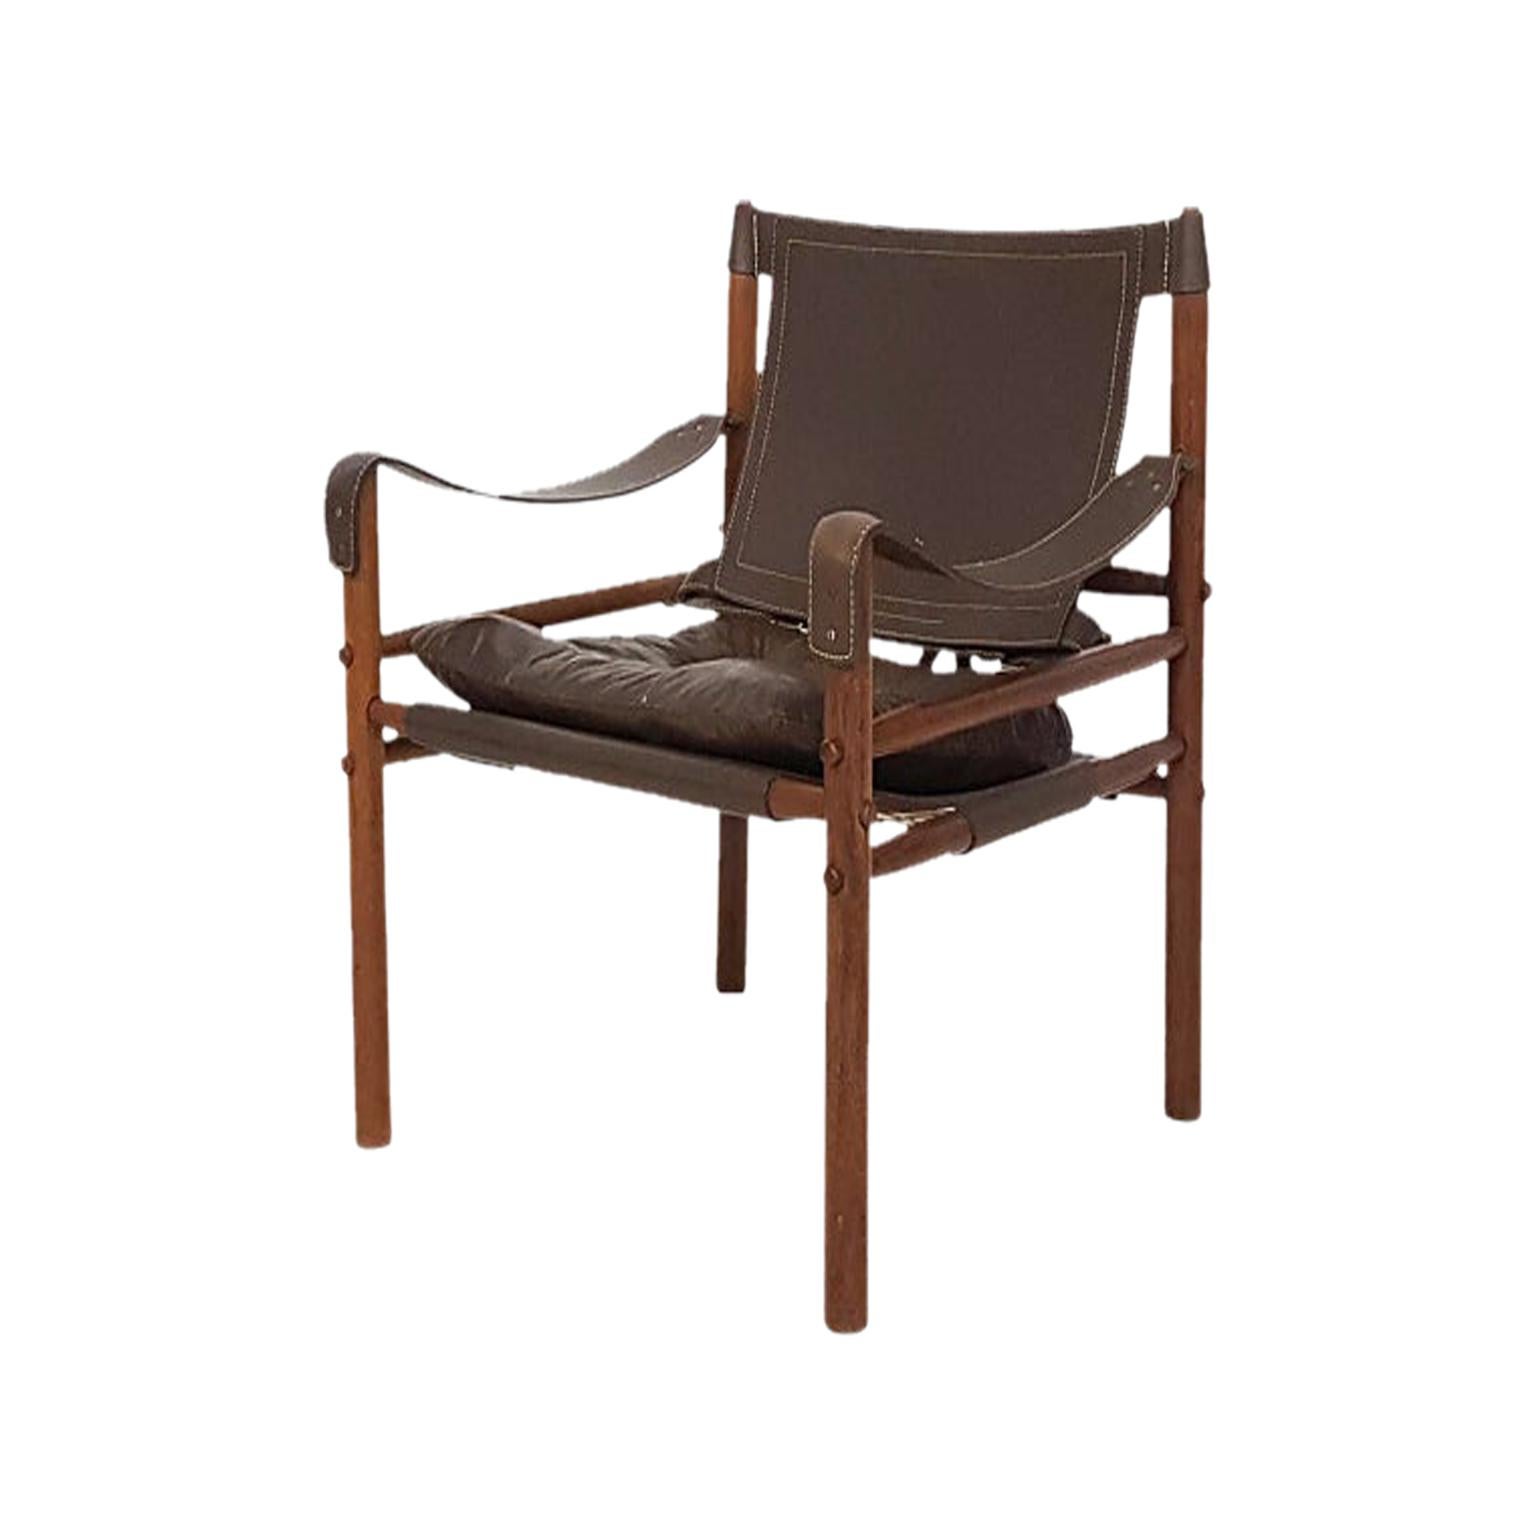 Scanform Edition Arne Norell "Sirocco" Leather Safari Lounge Chair, Colombia